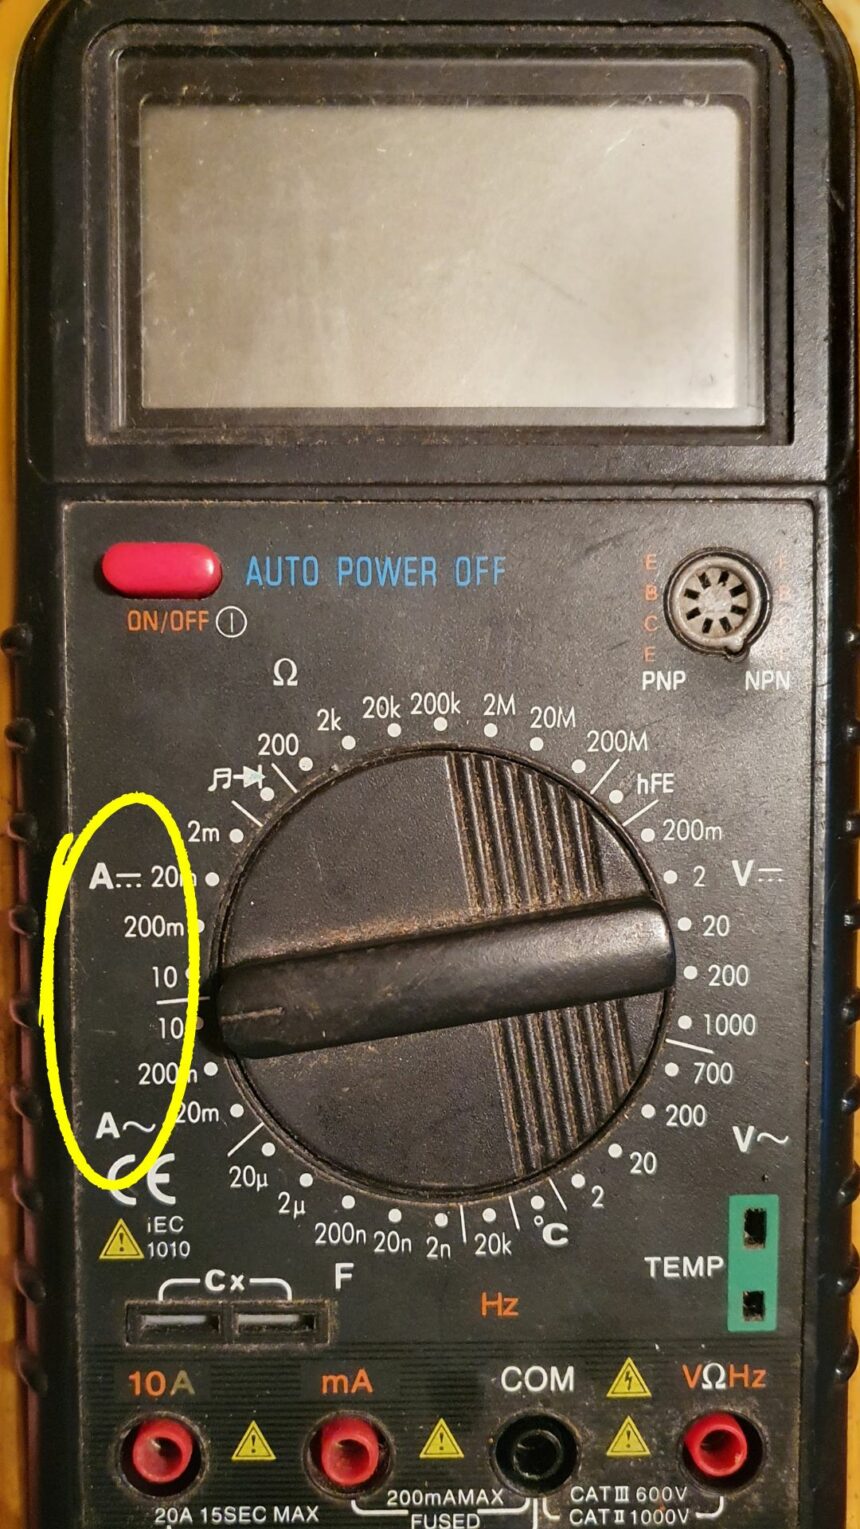 Multimeter Amp Settings image containing a multimeter that has separate AC and DC amp test settings